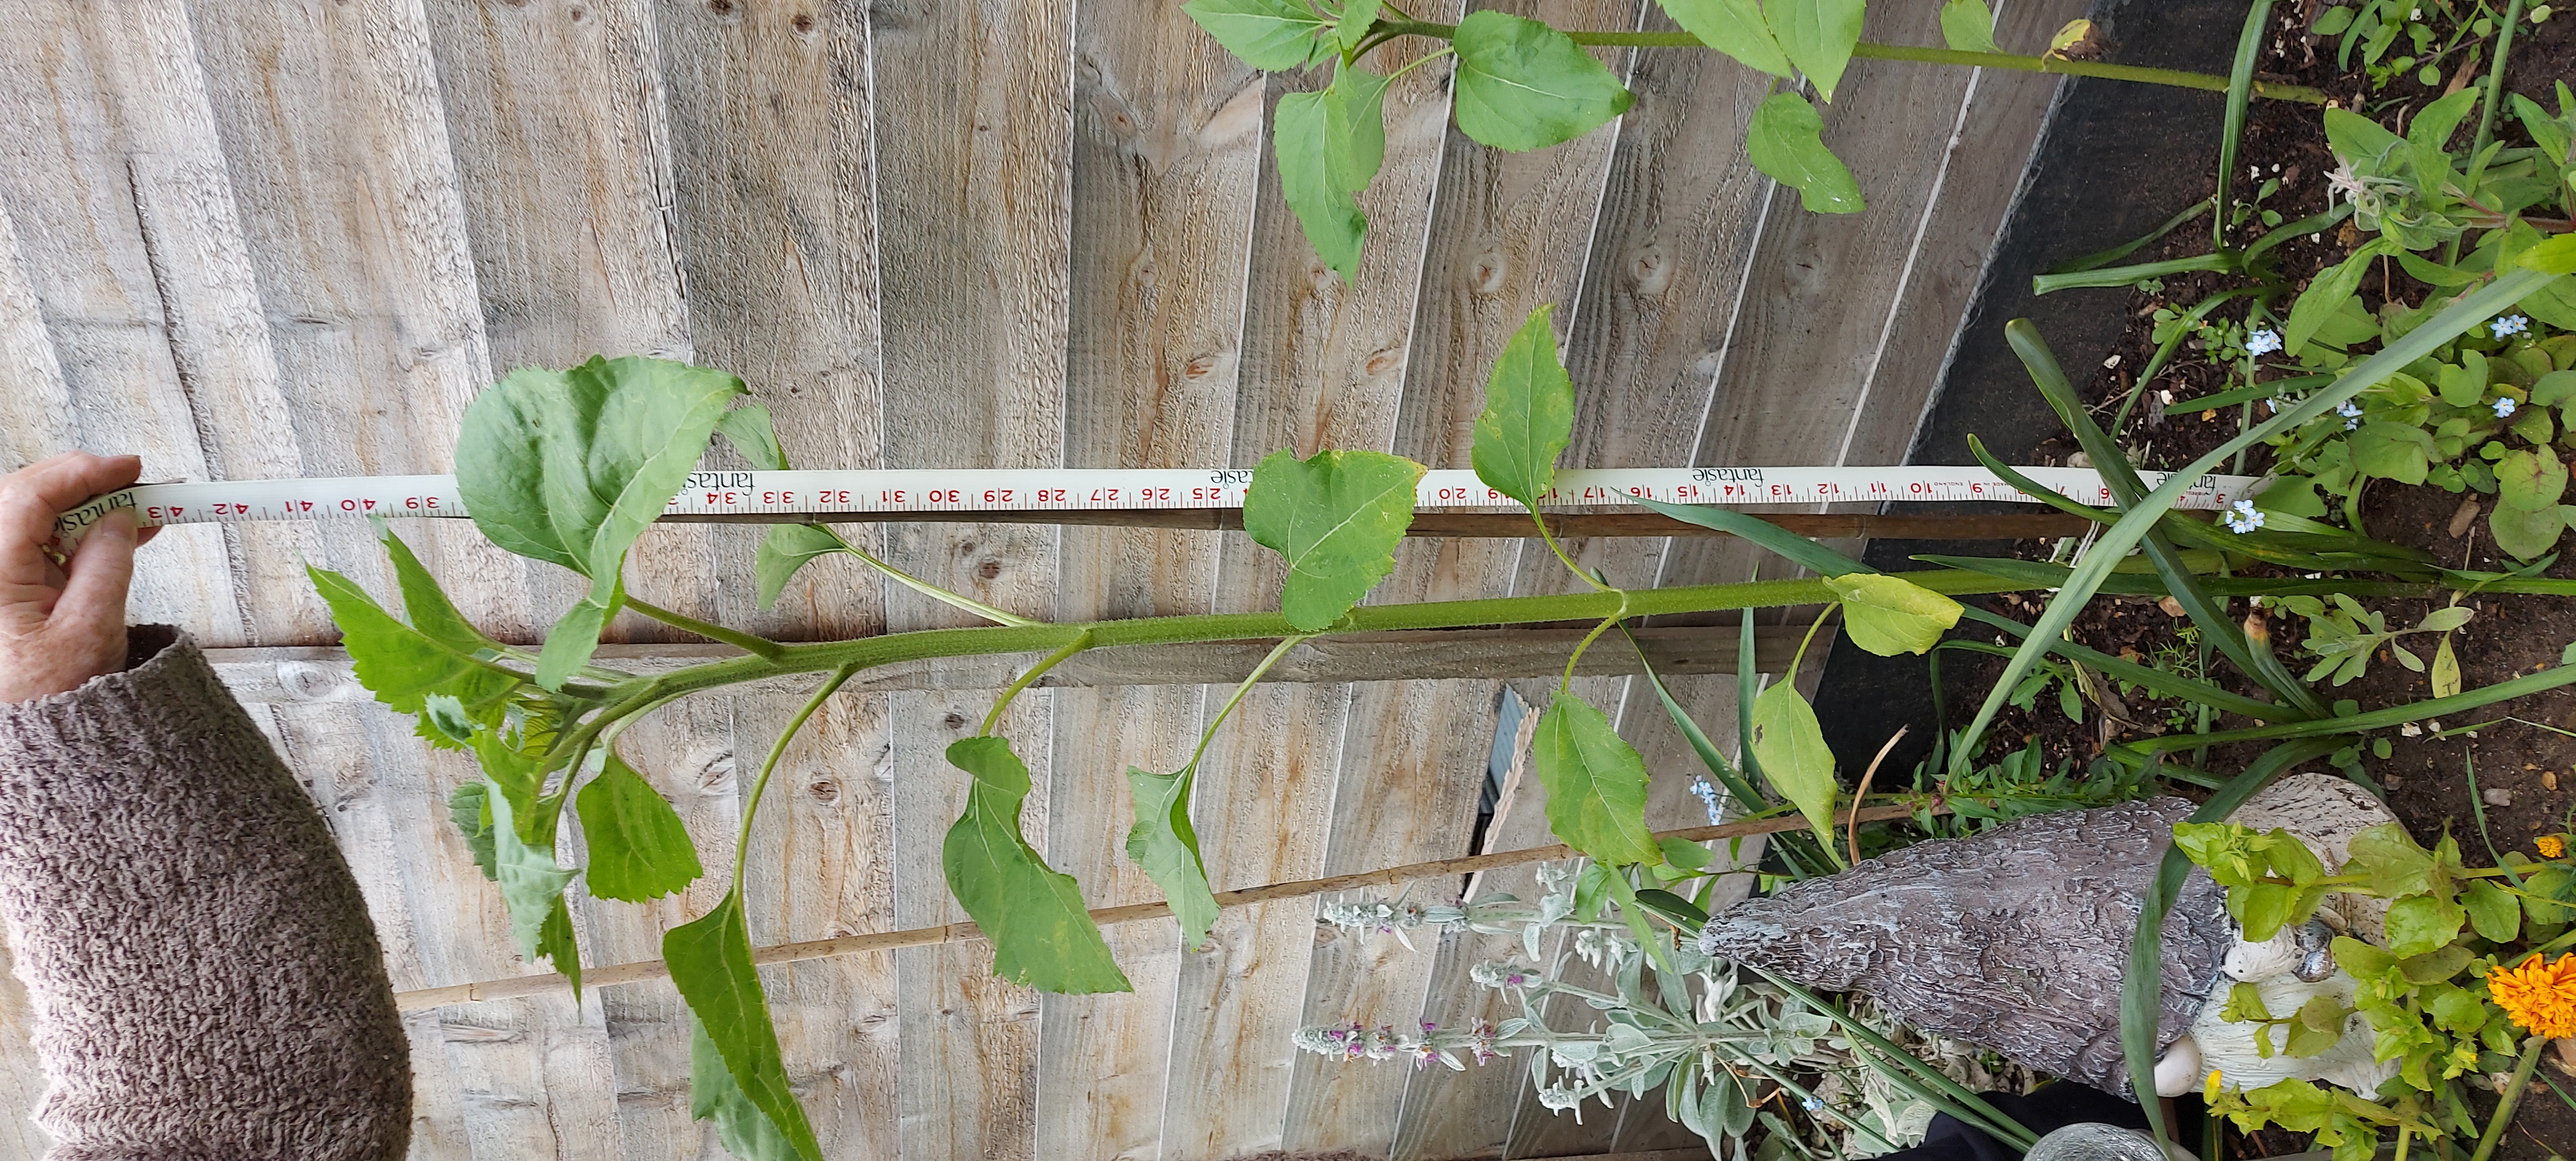 Lorraine C's sunflower next to a measuring tape coming up to 40 inches!